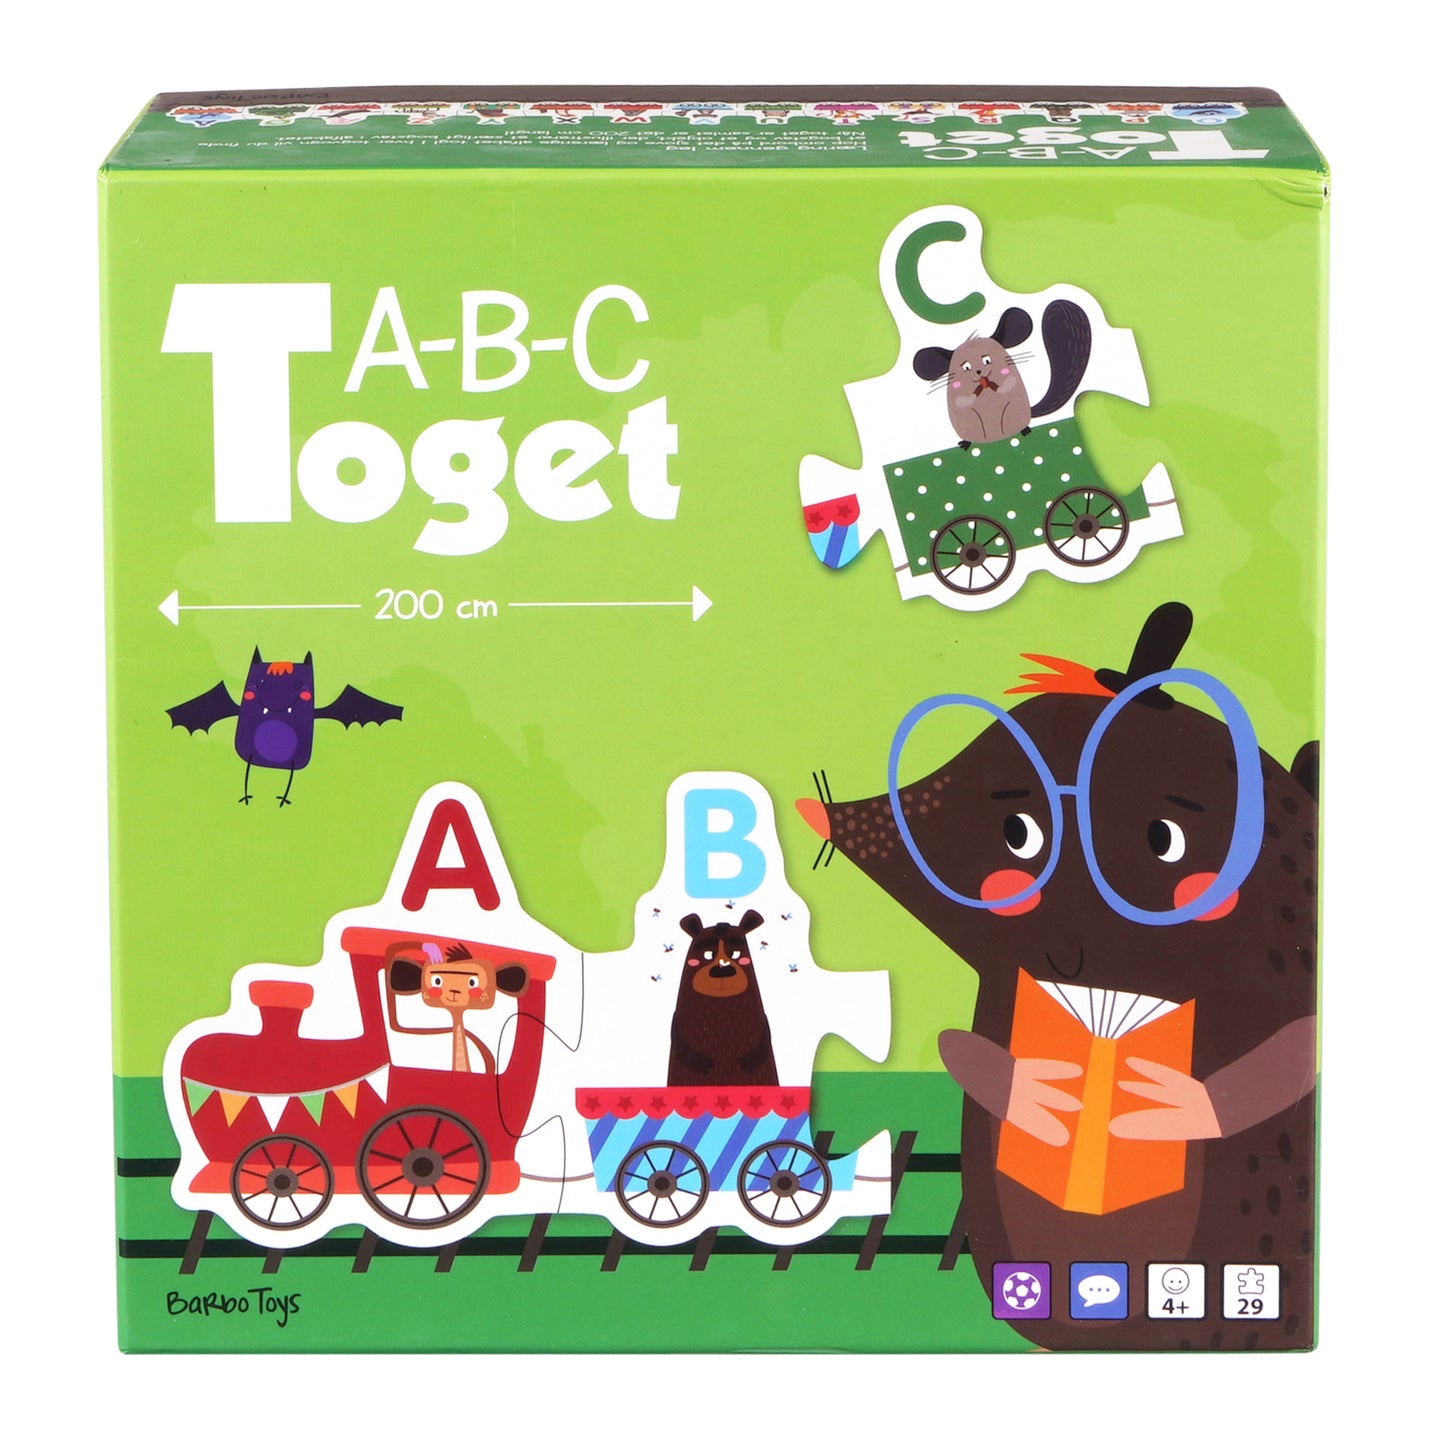 a b c toget box game